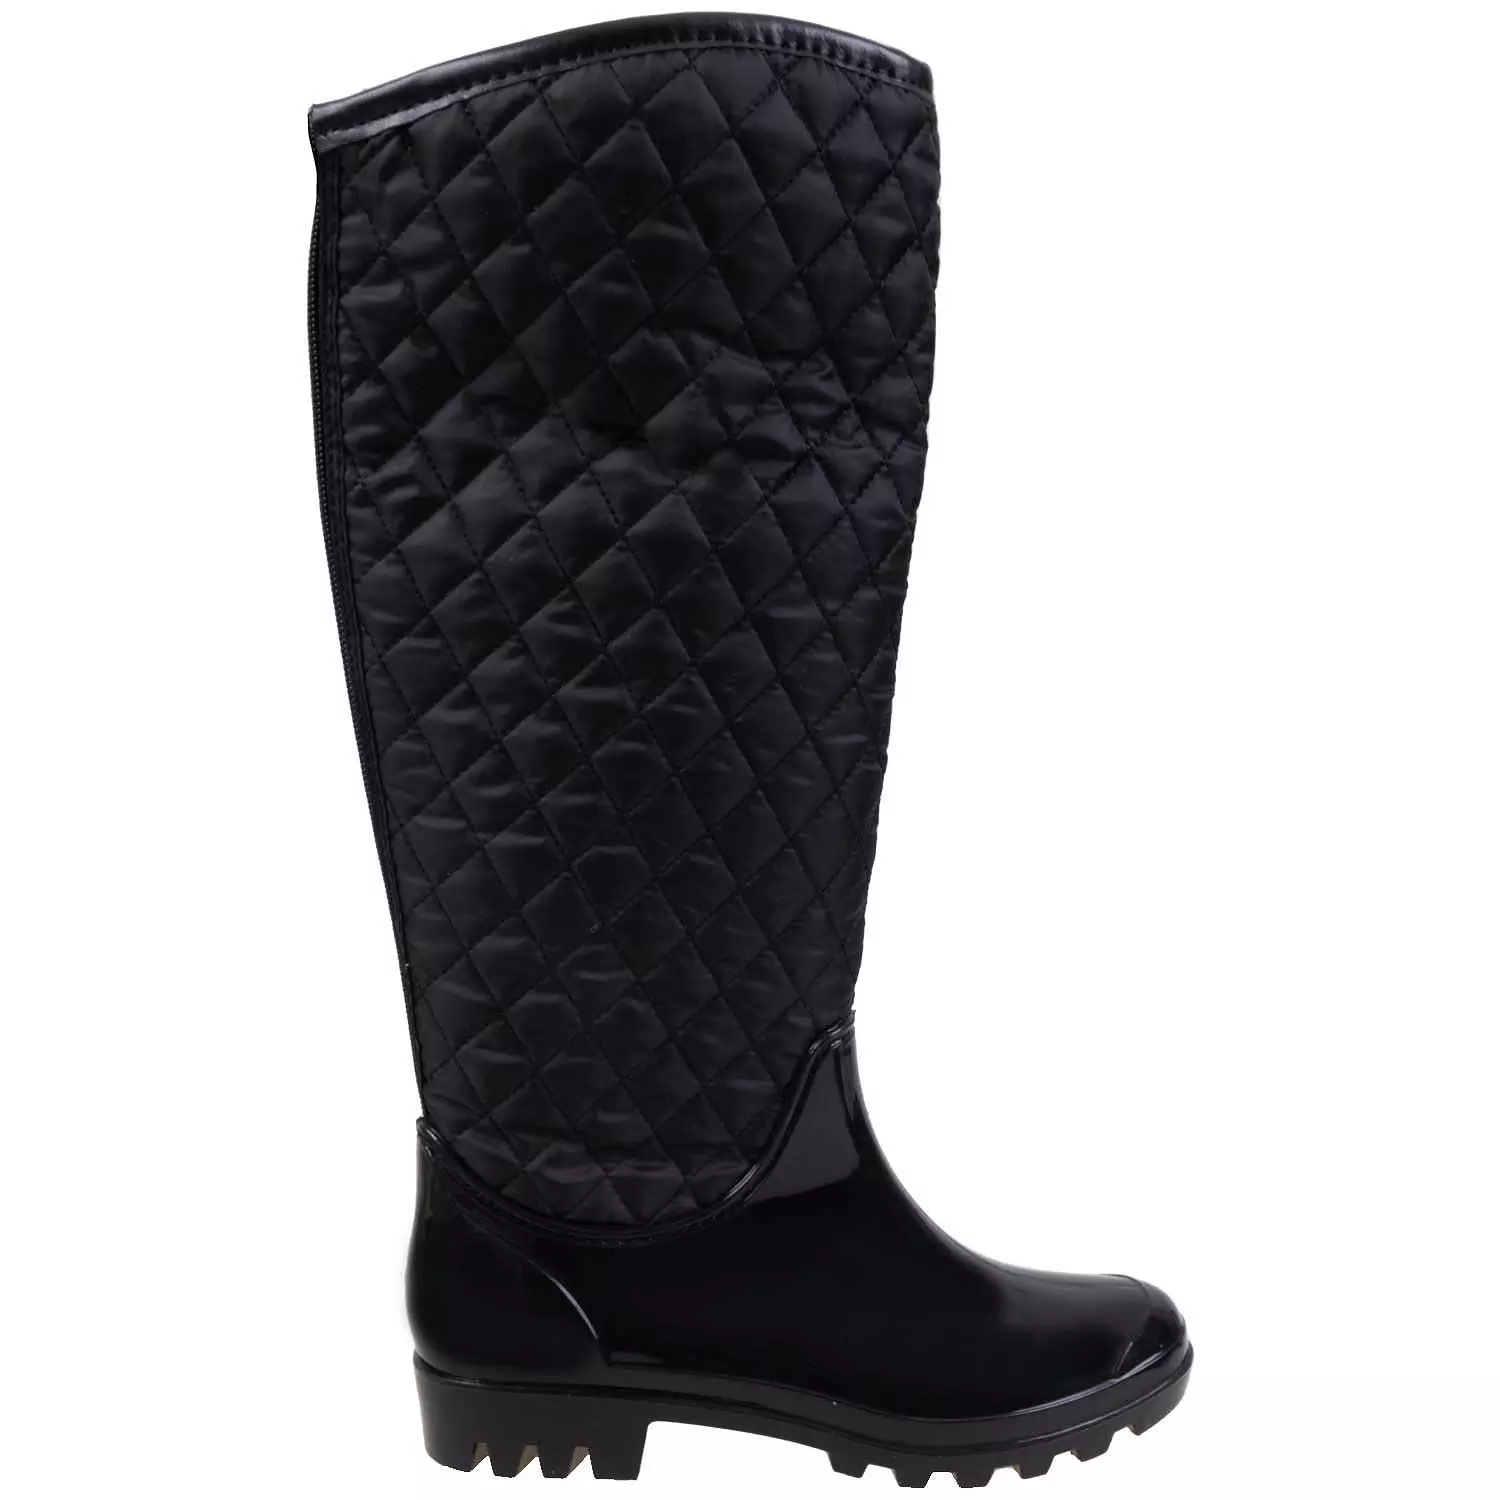 BB Collection, women's black rainboots with quilted upper, size 6